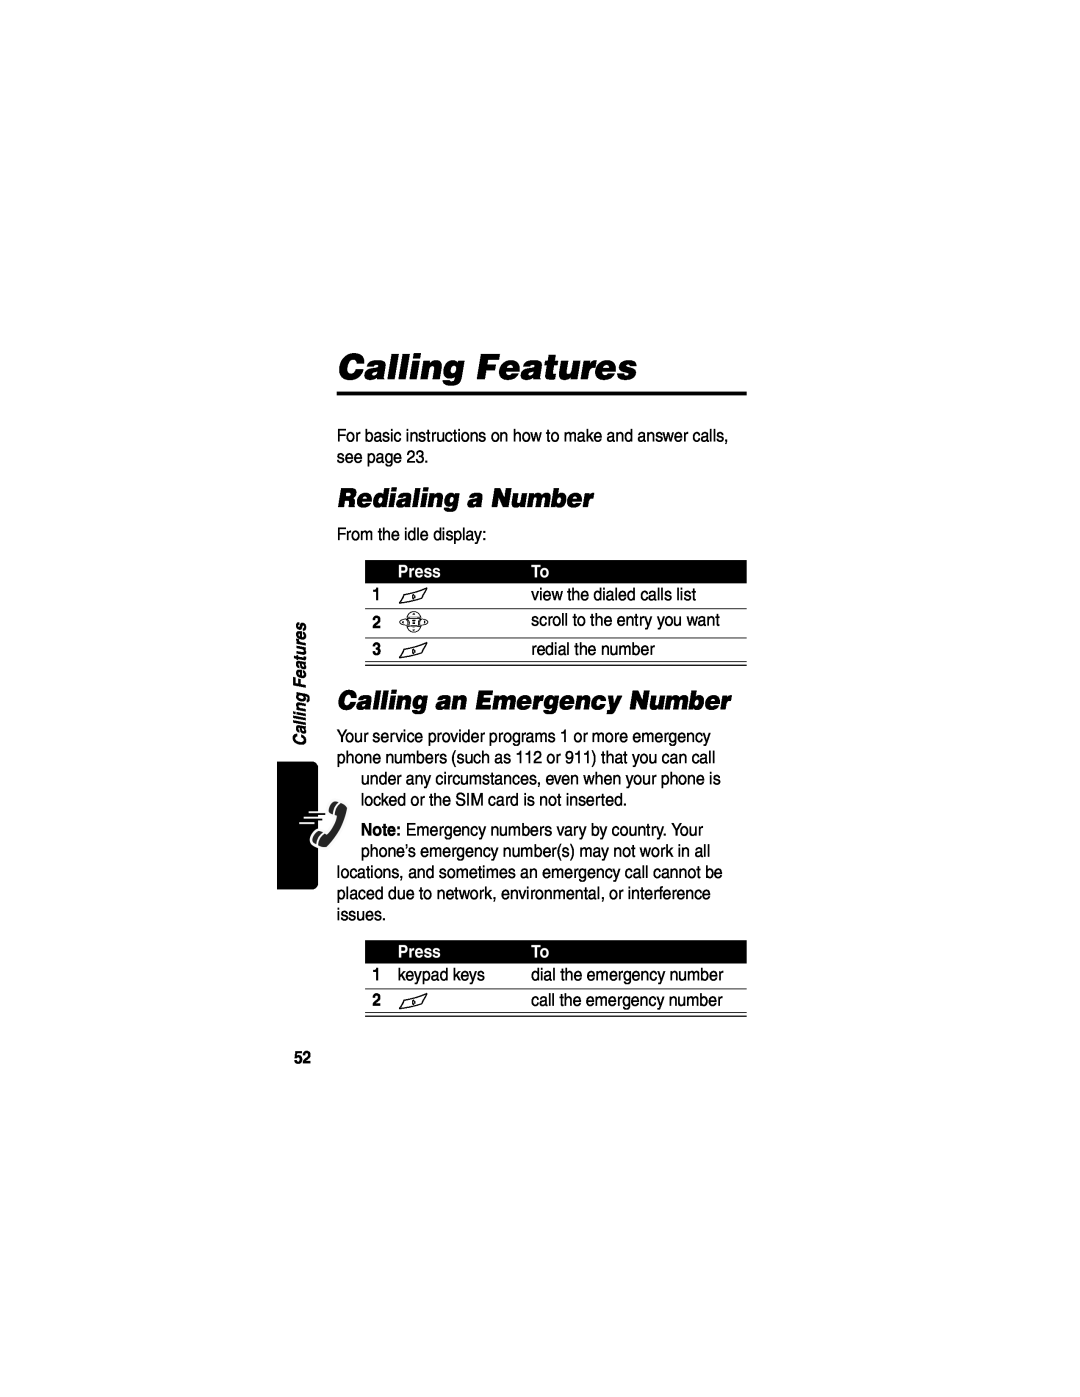 Motorola WIRELESS TELEPHONE manual Calling Features, Redialing a Number, Calling an Emergency Number, Press 